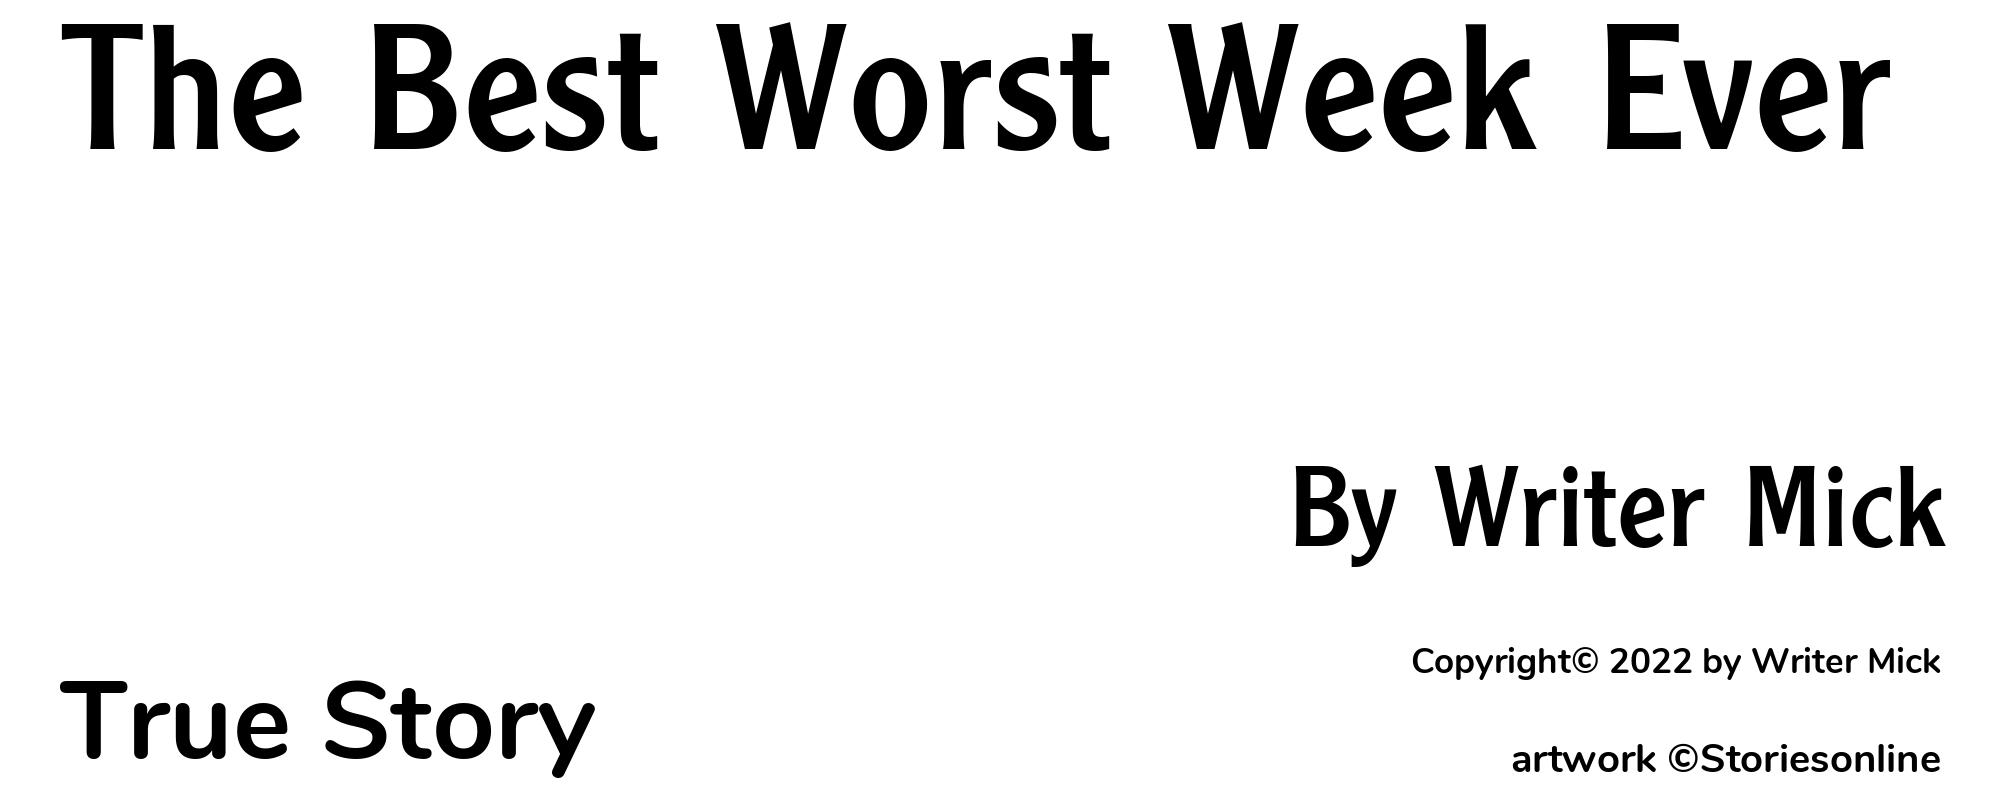 The Best Worst Week Ever - Cover